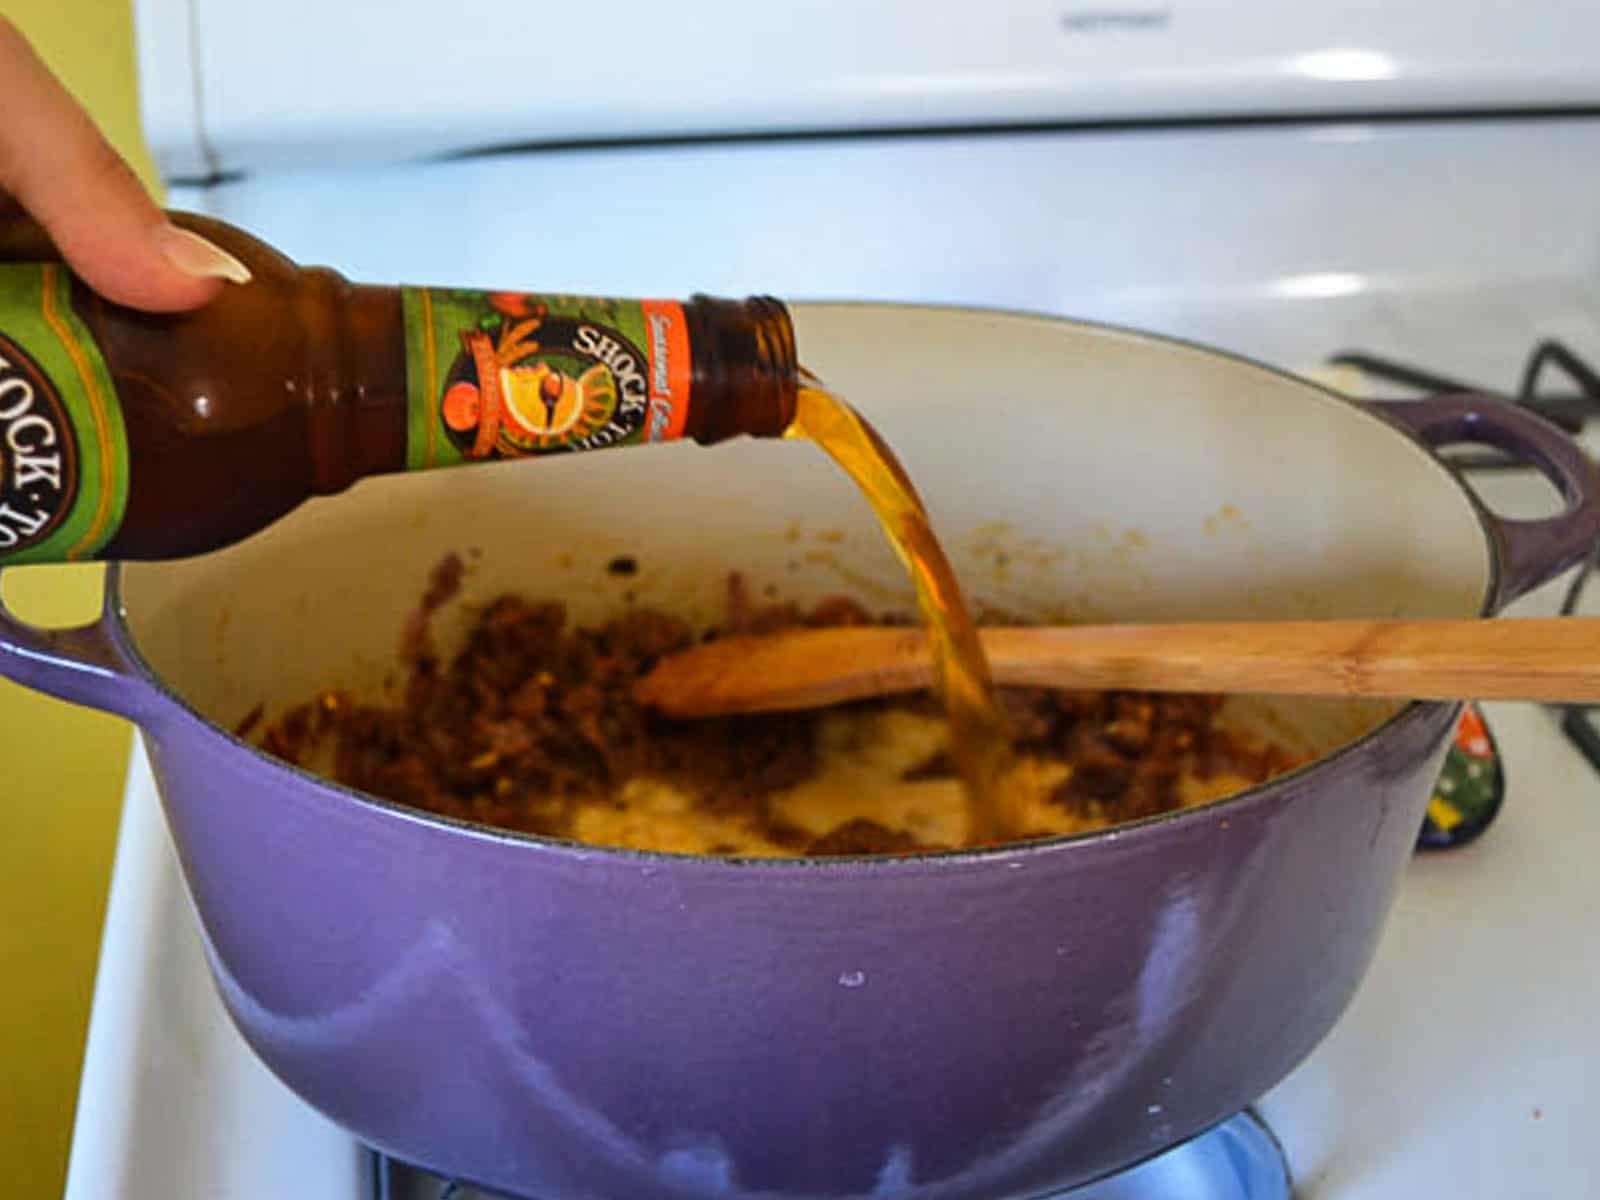 Pour a bottle of pumpkin beer into the cooked beef and let the beer reduce slightly.